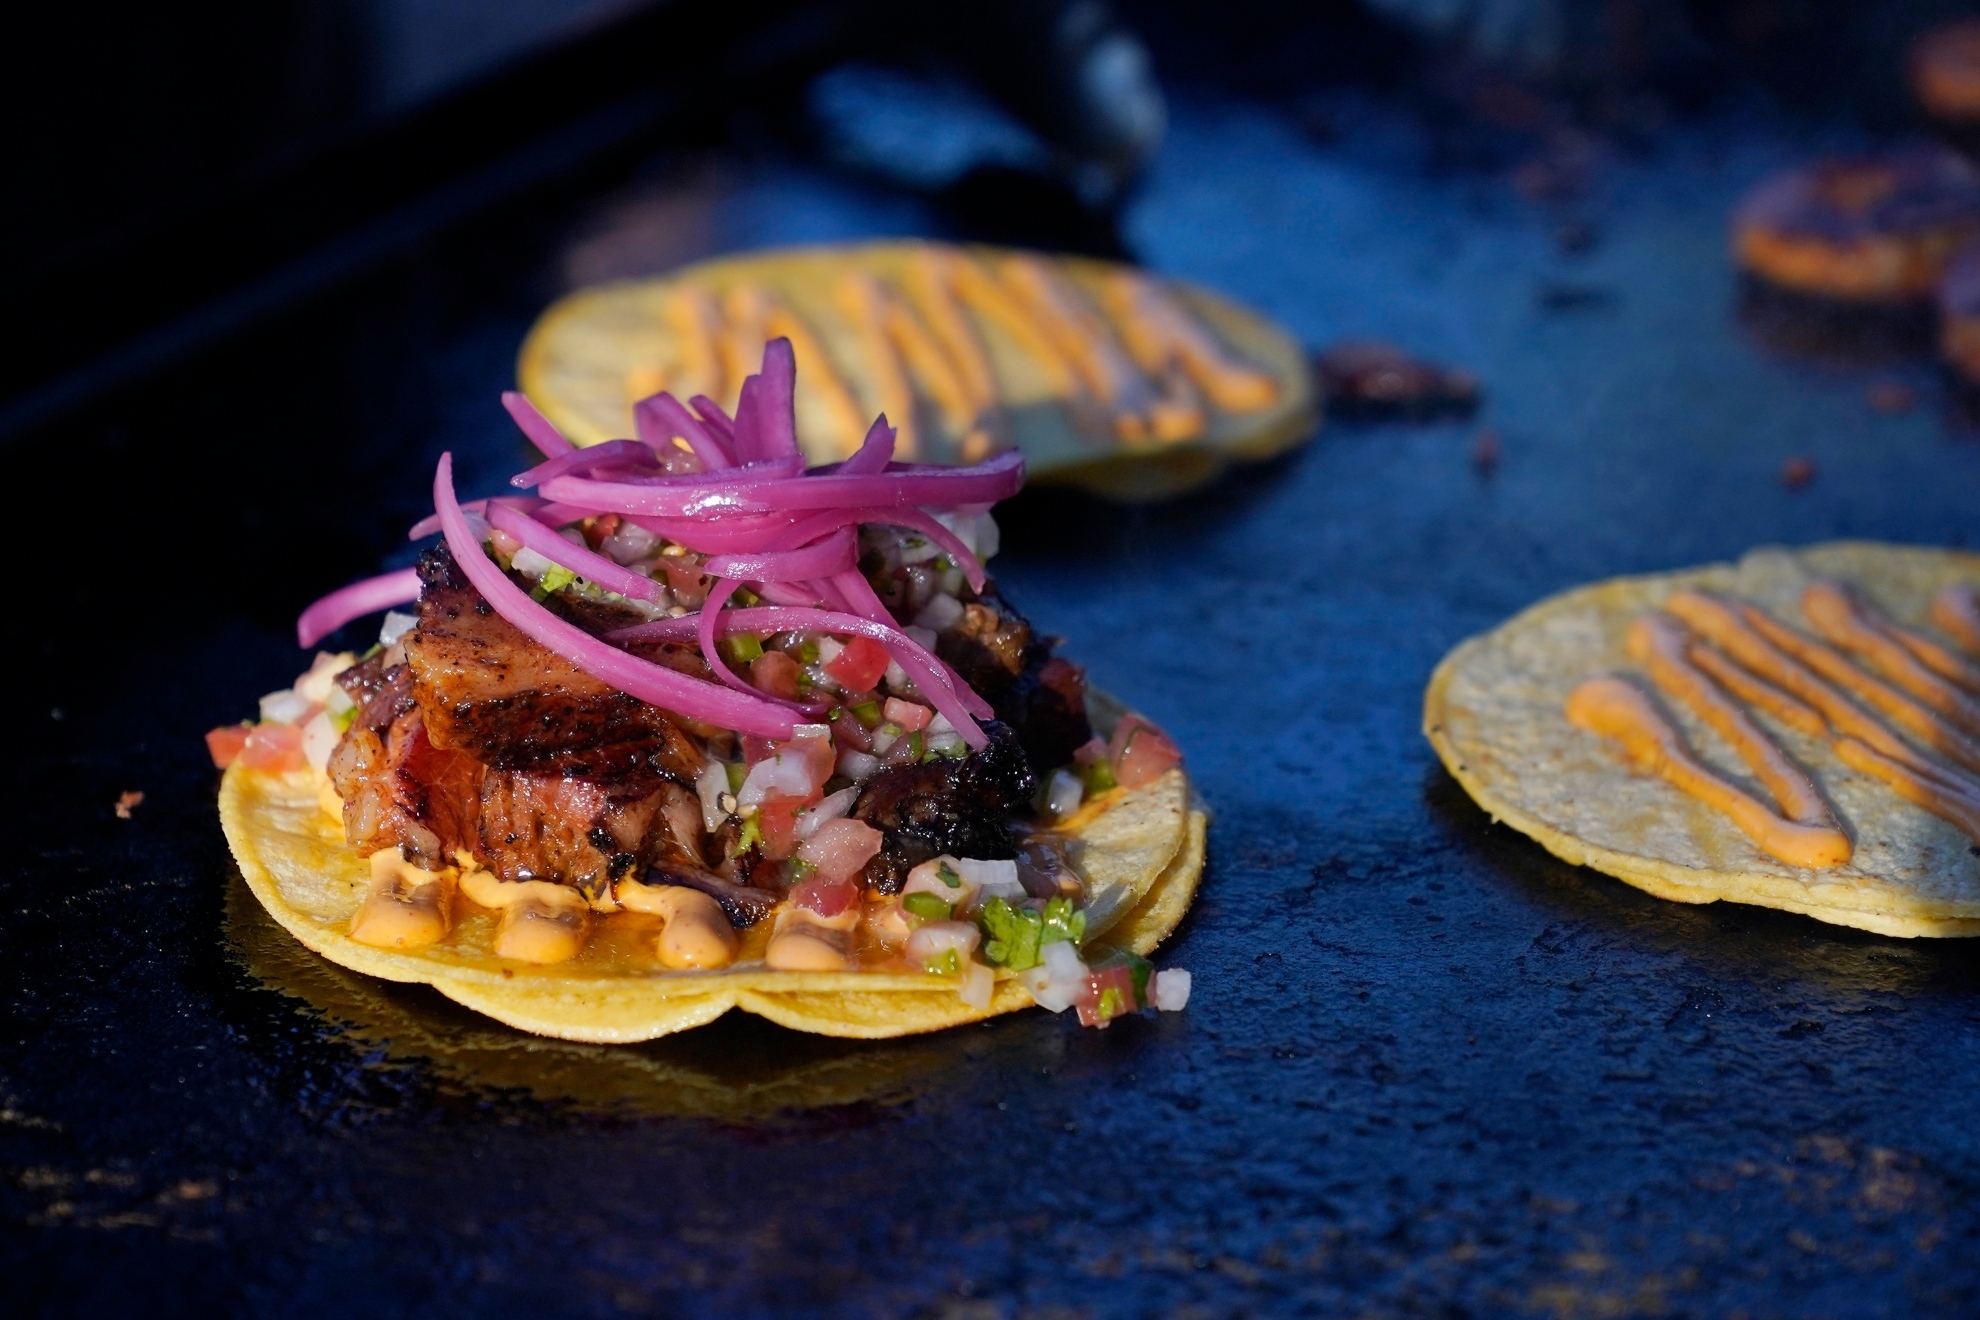 Image of a tostada with meat on top.